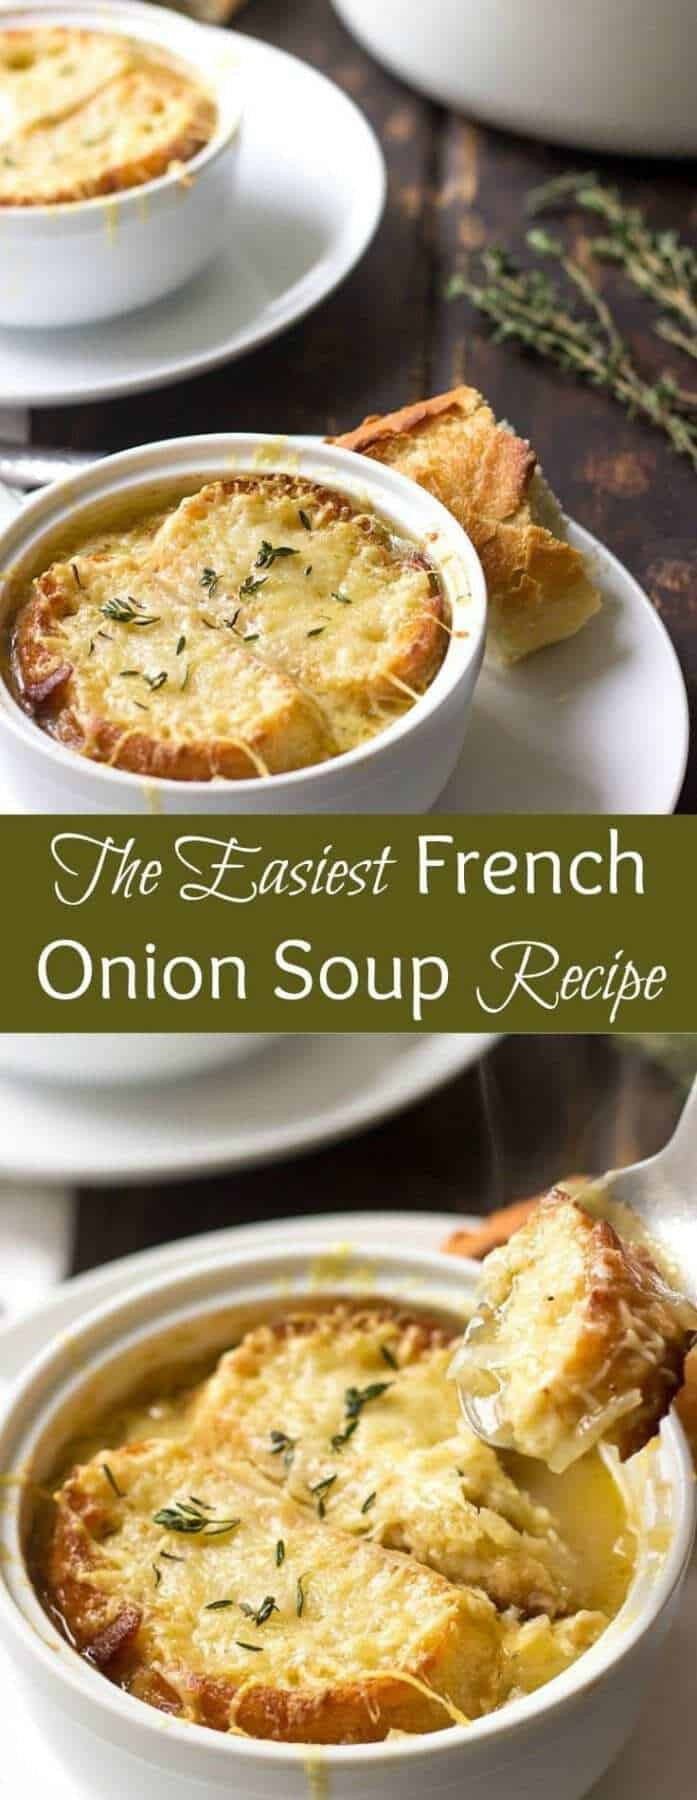 The Best Cheese for French Onion soup - Best Recipes Ideas and Collections